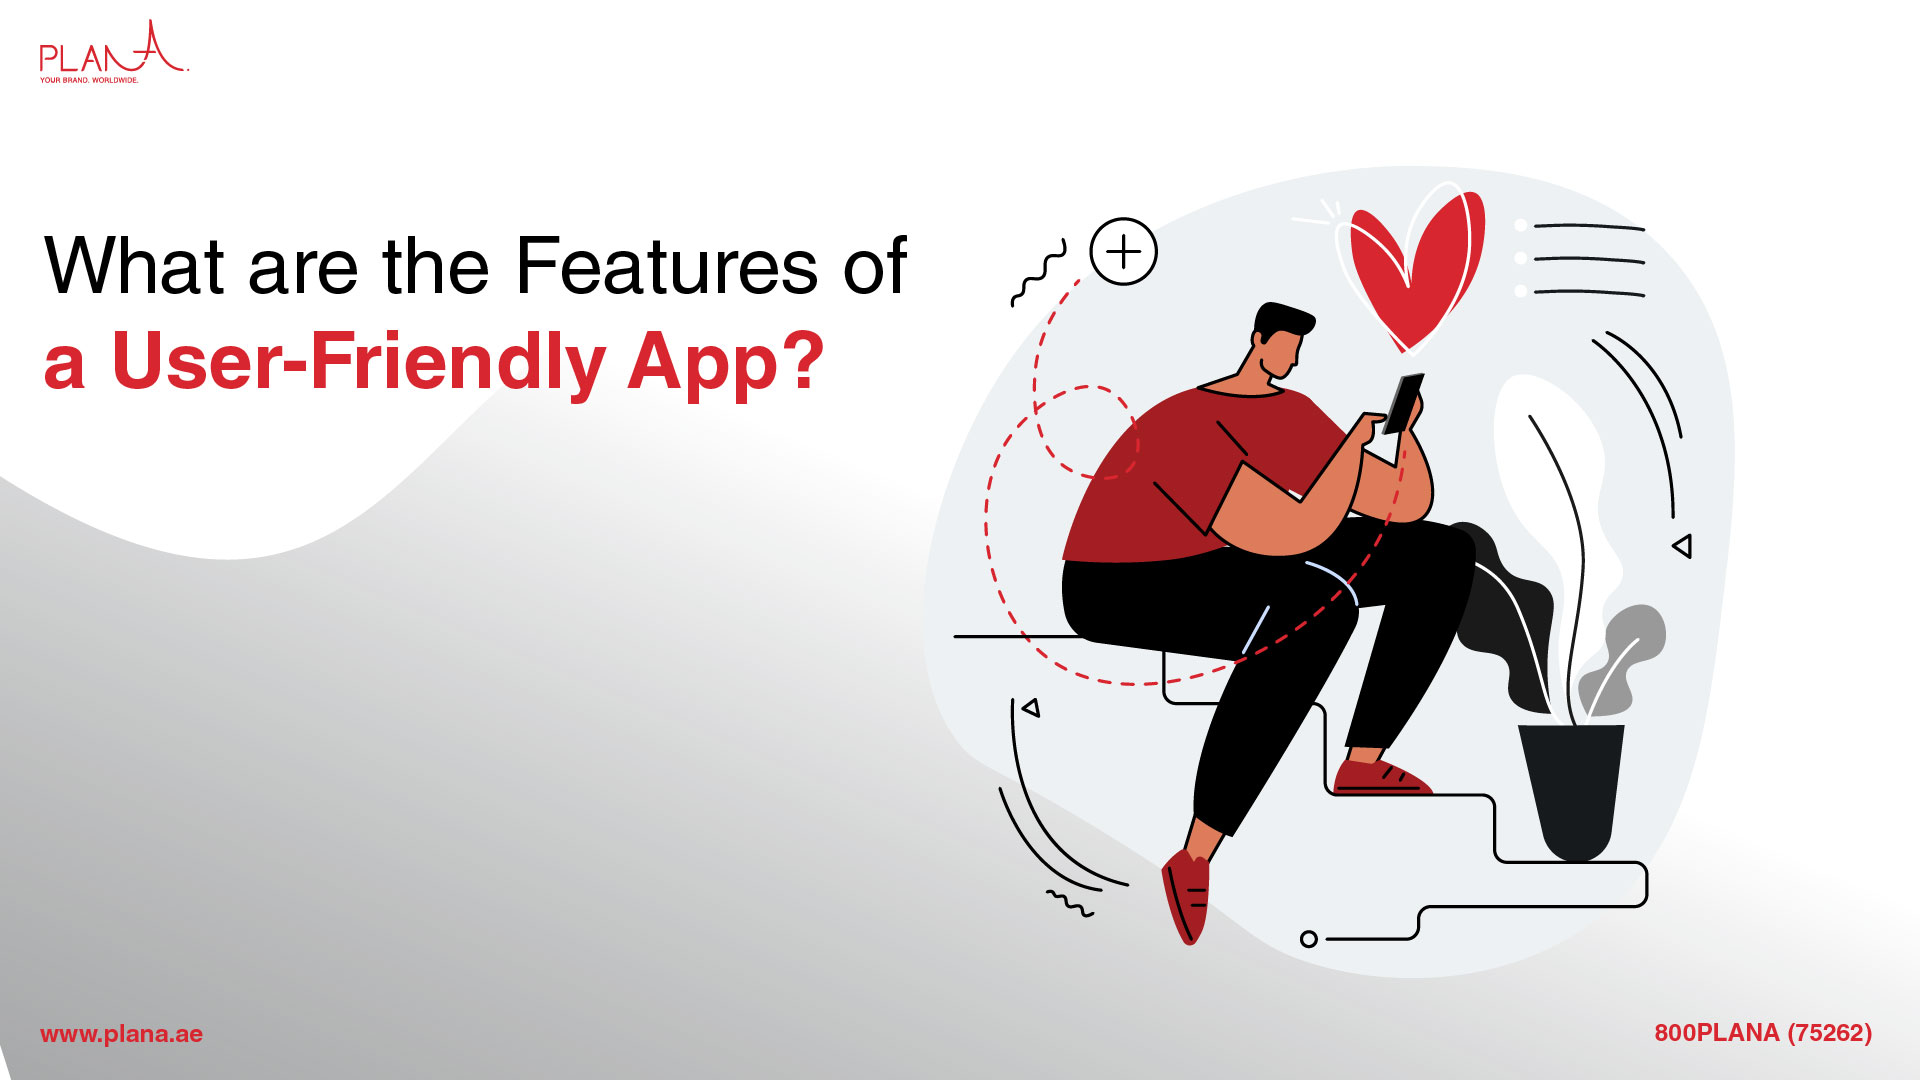 What are the features of a user-friendly app?